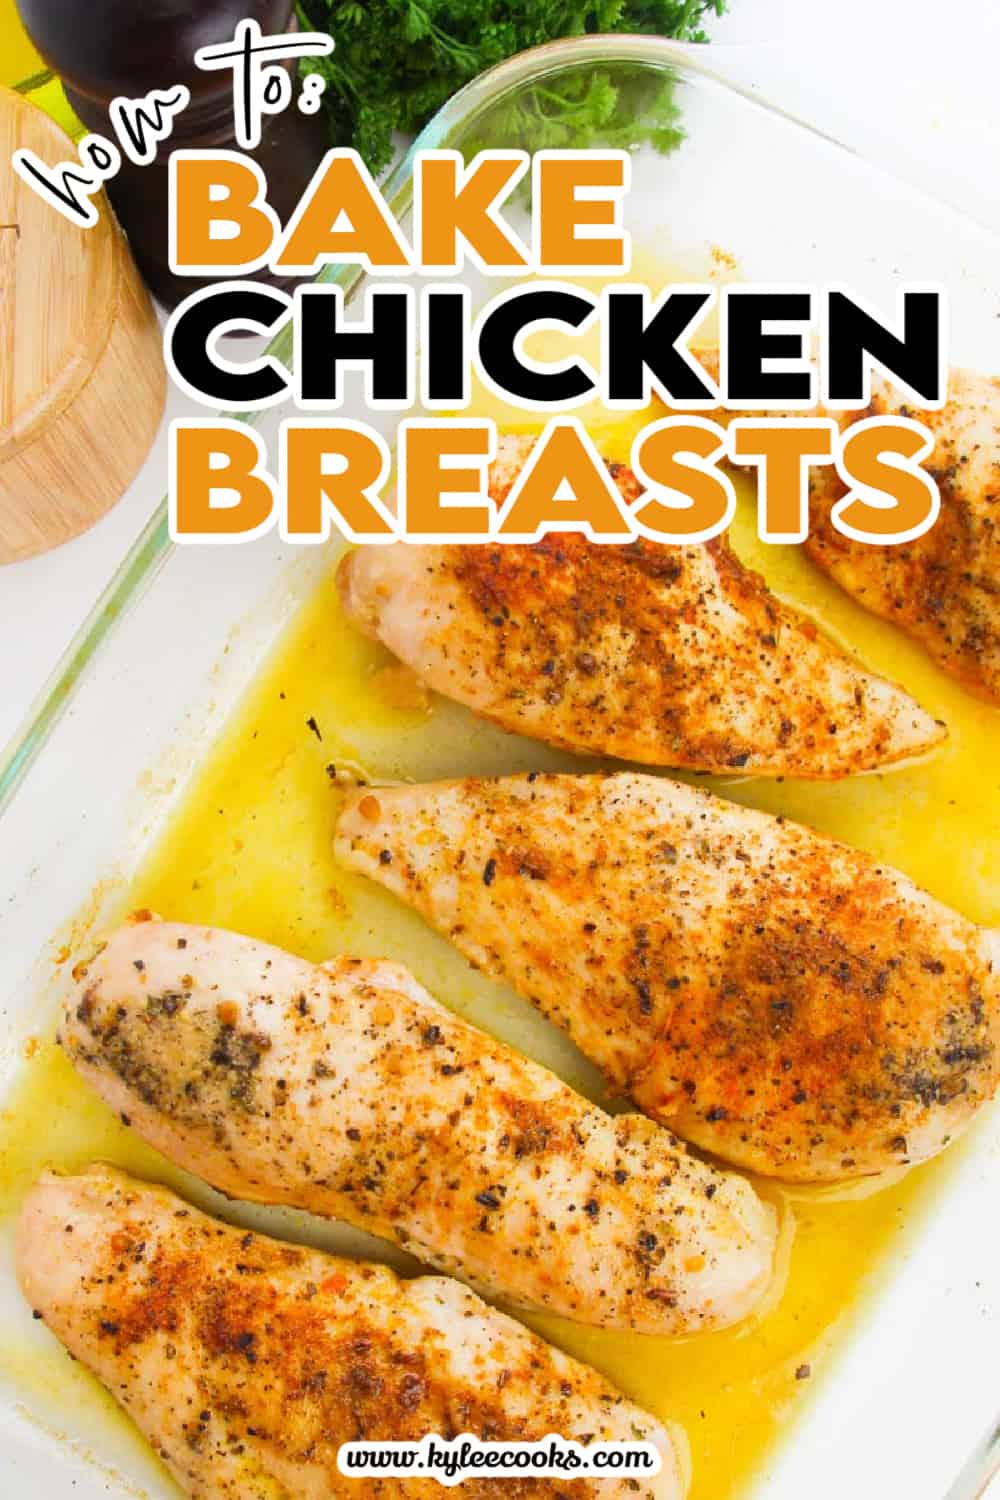 chicken breasts in a white baking dish with recipe name overlaid in text.